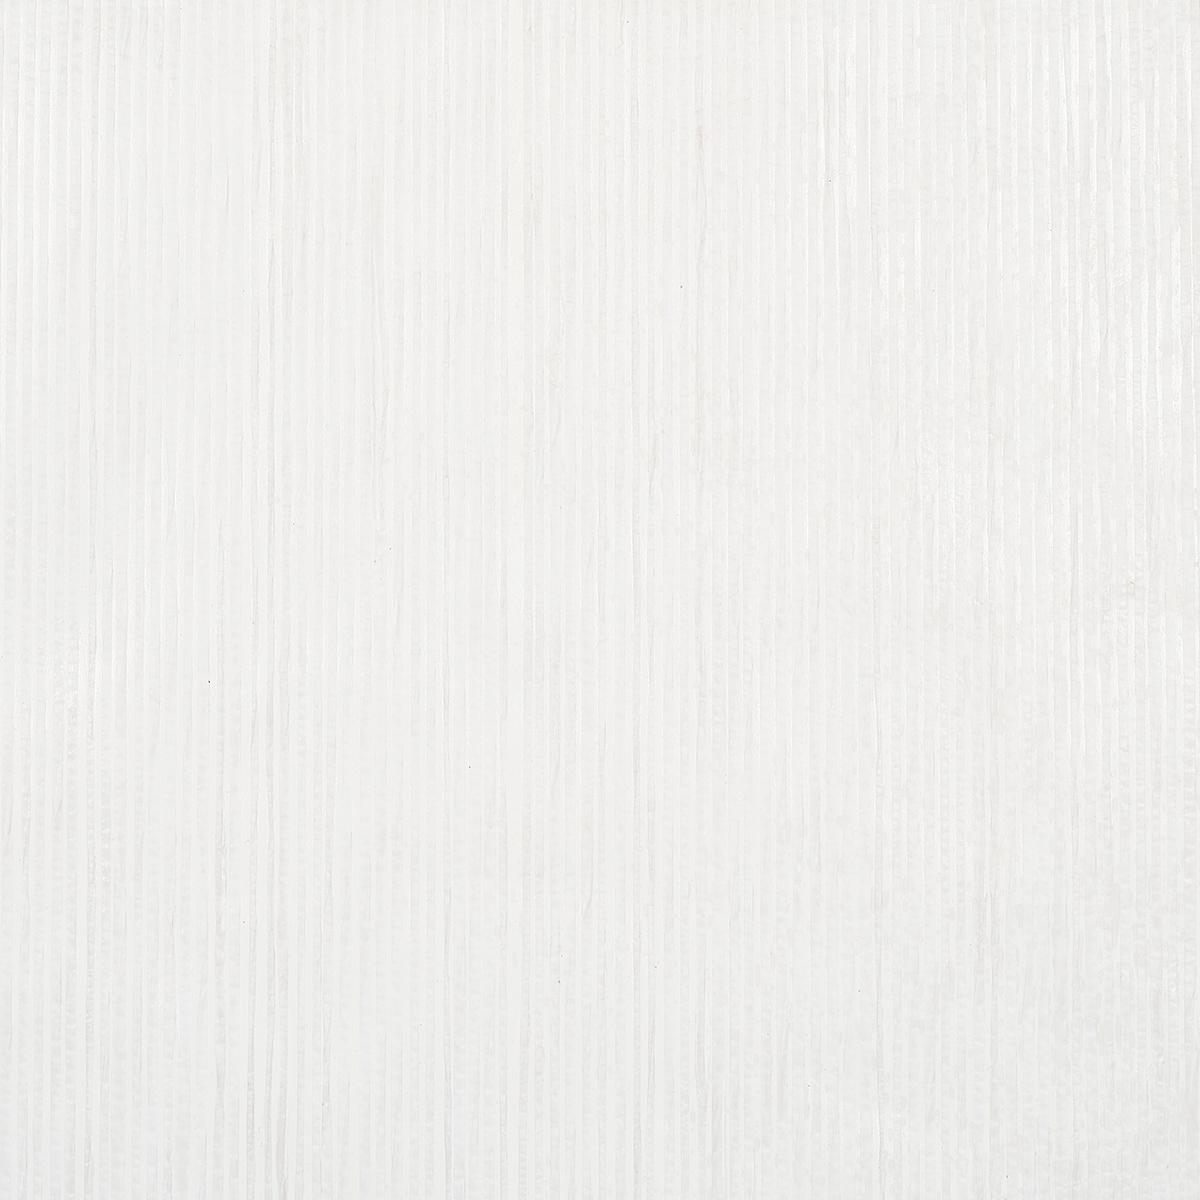 White Striped Wallpaper Texture Stock Photo, Picture and Royalty Free  Image. Image 25429943.